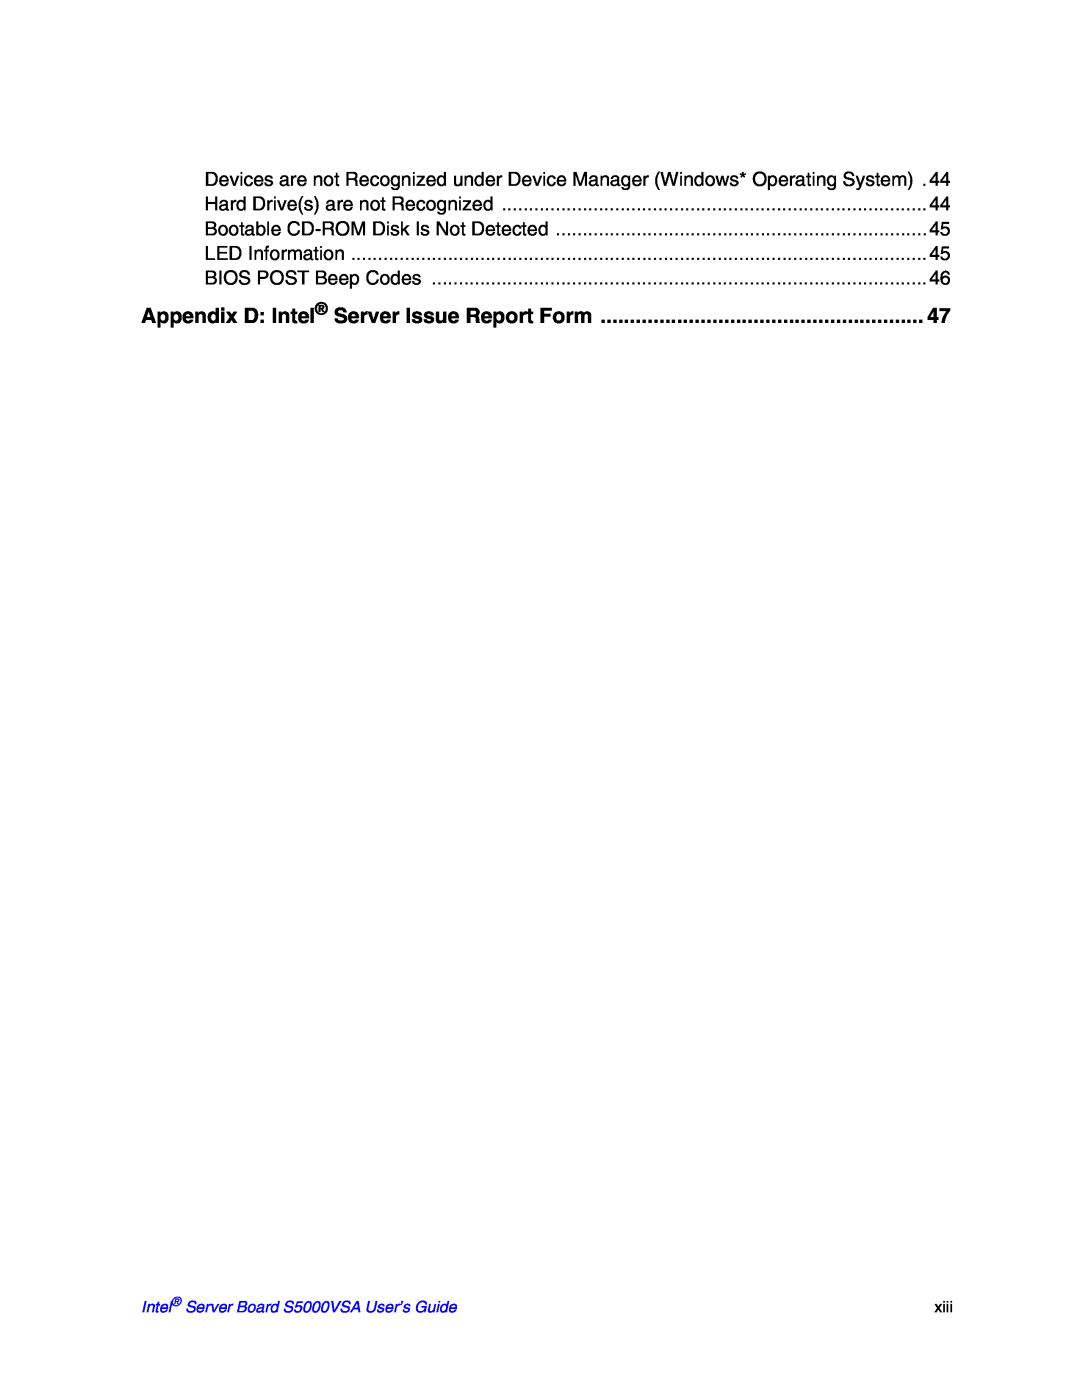 Intel S5000VSA manual Appendix D Intel Server Issue Report Form, Hard Drives are not Recognized, LED Information, xiii 